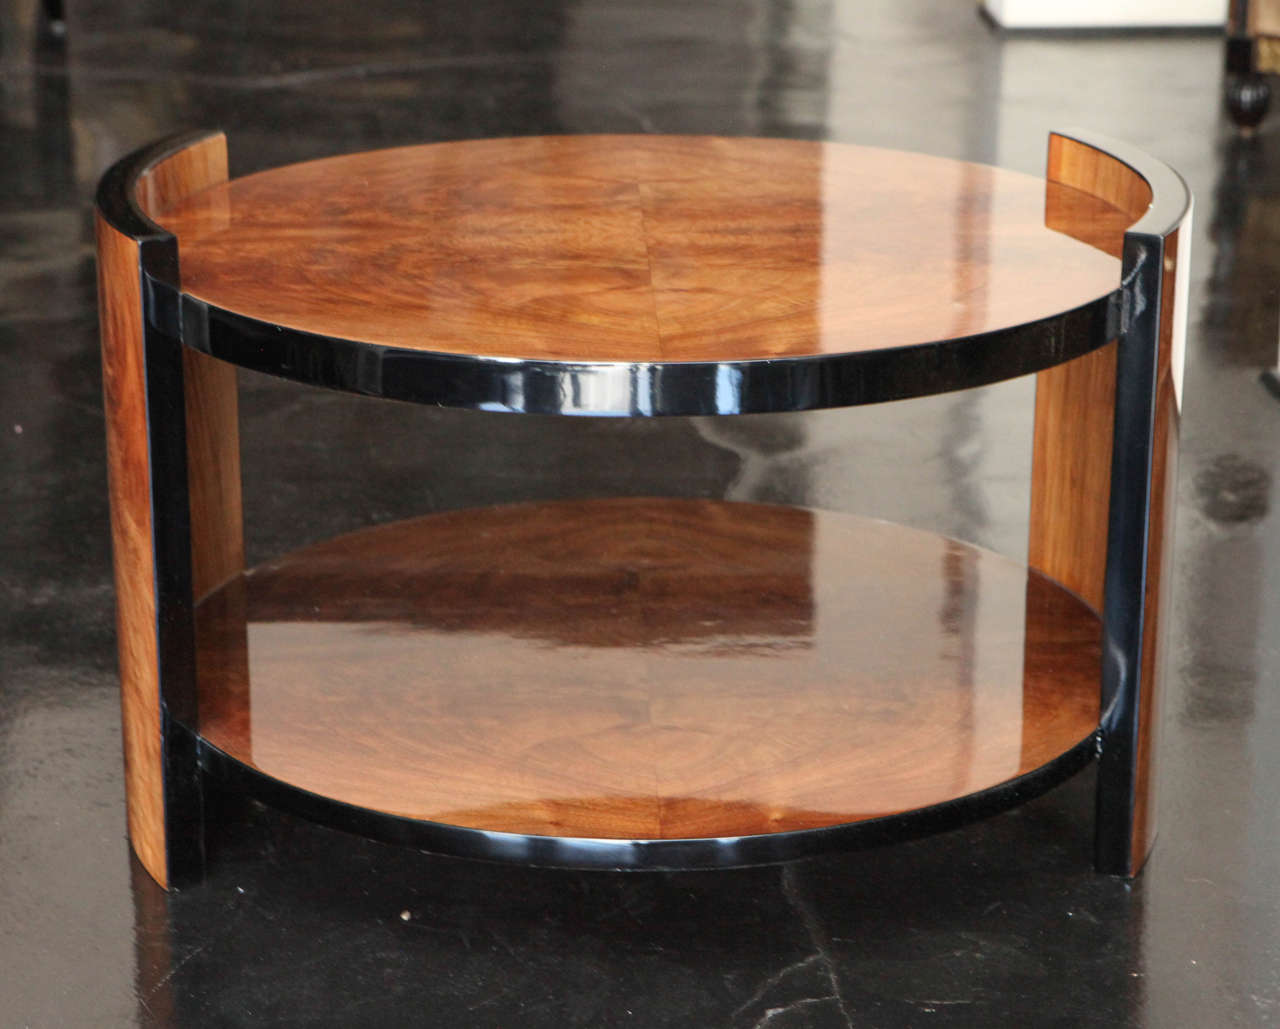 Oval, two-tiered side table with book-matched walnut crotch veneer. Black lacquer detailing around sides. Wonderful as smaller coffee table as well.